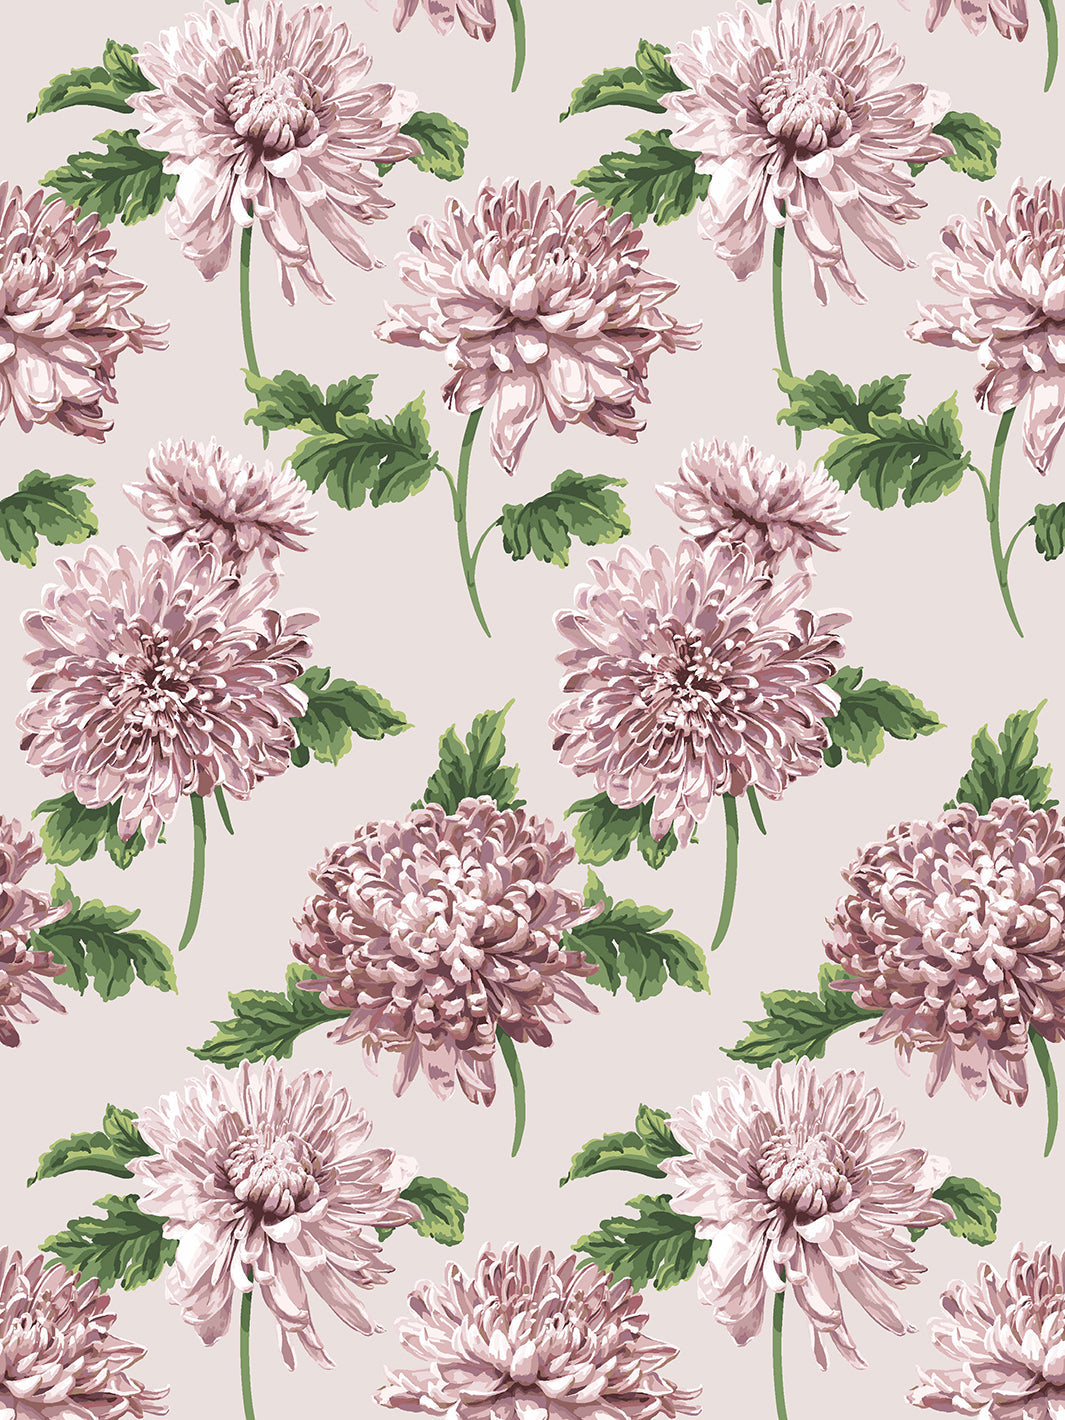 'Mums for Marion Small' Wallpaper by Sarah Jessica Parker - Oyster